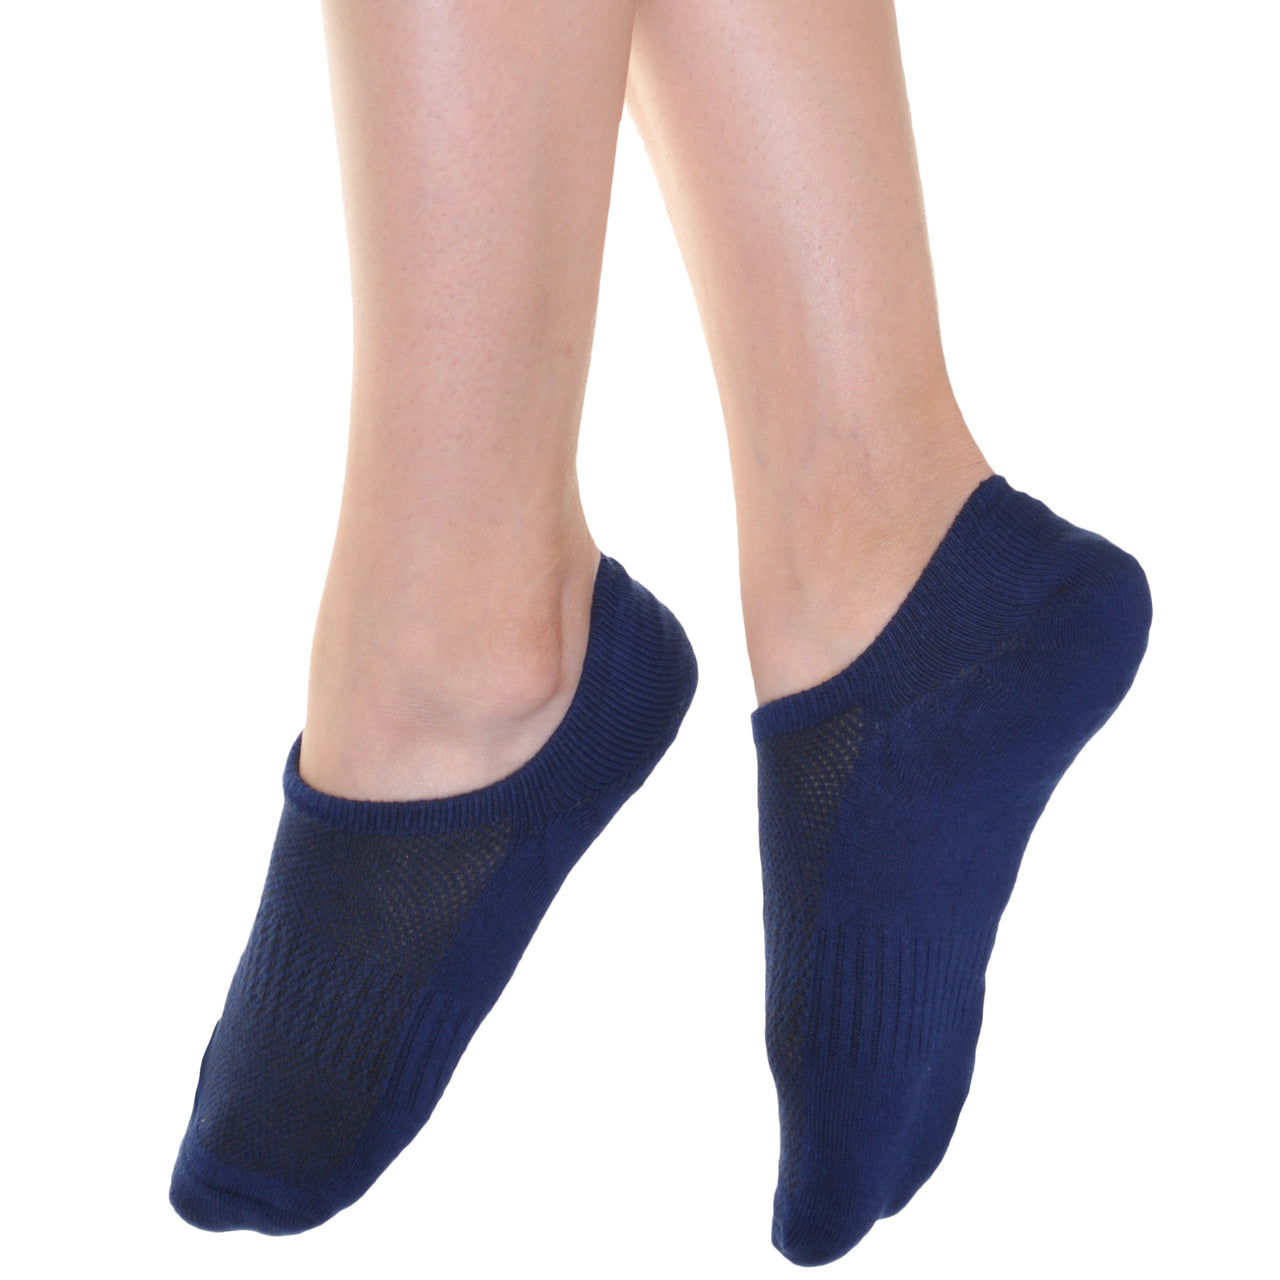 invisible socks with heel grips